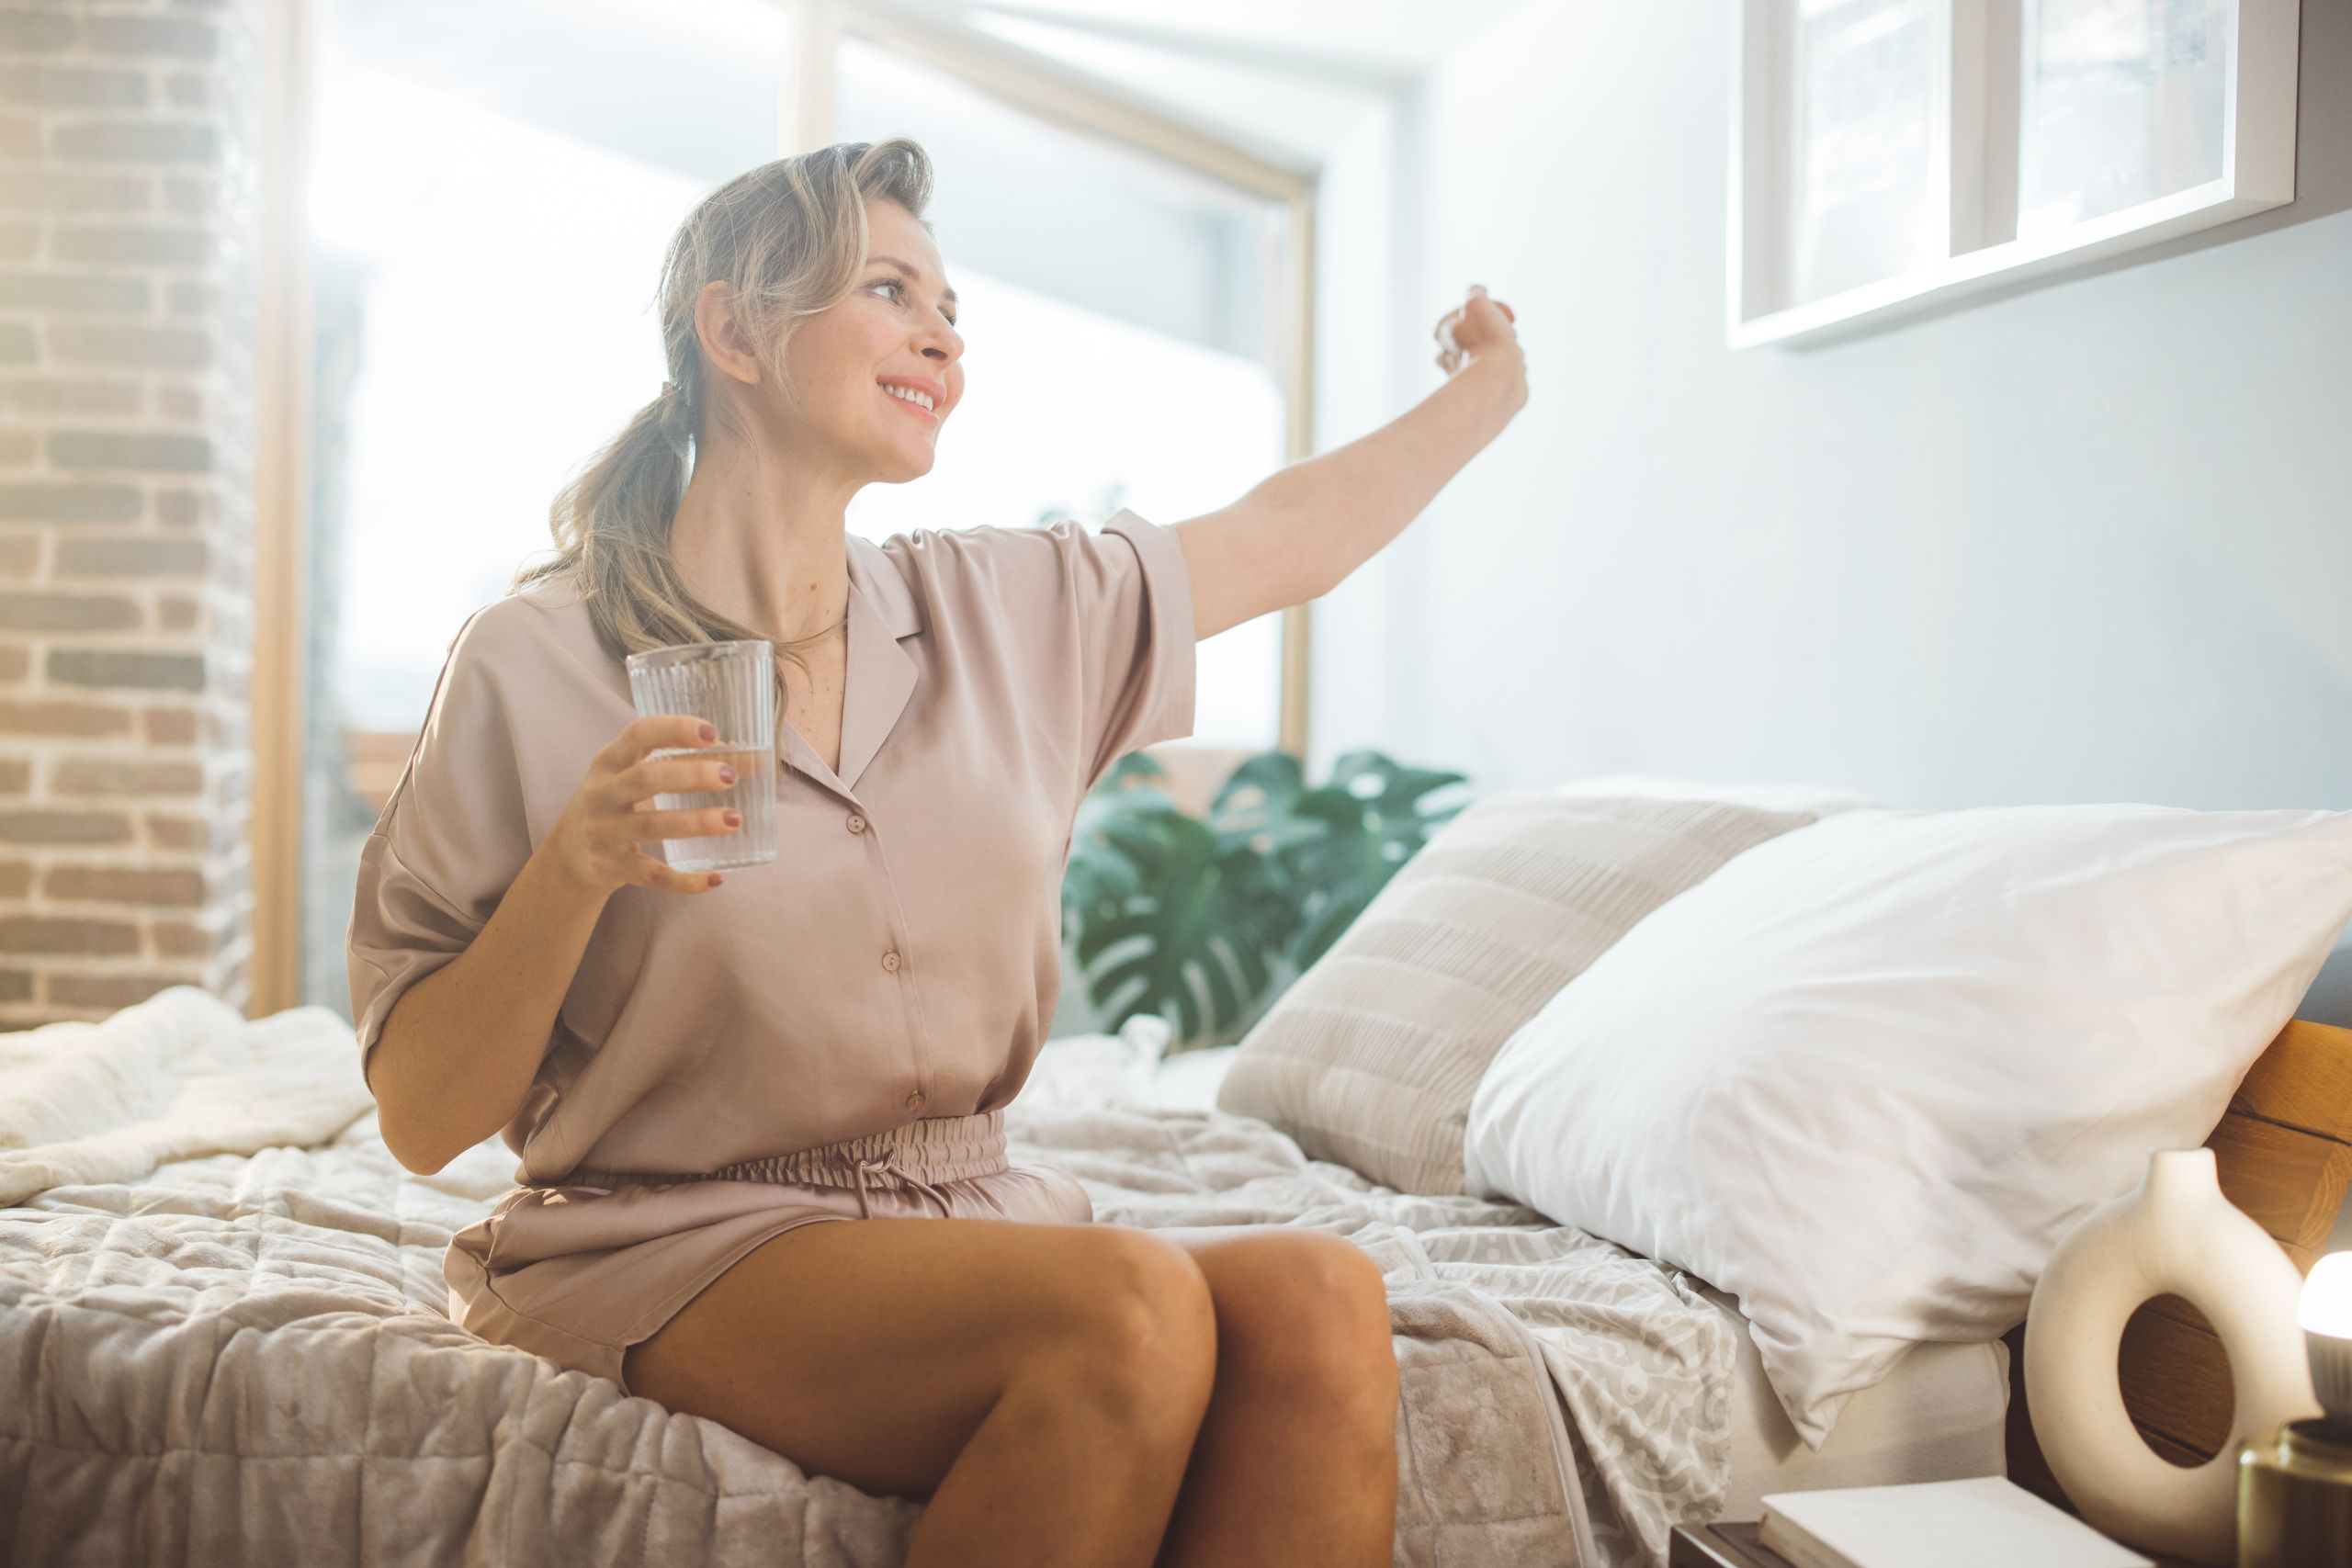 A smiling woman stretching her arms , sitting on her bed as she has just woken up, the sun is shining through the window in her room and she is holding a glass of water